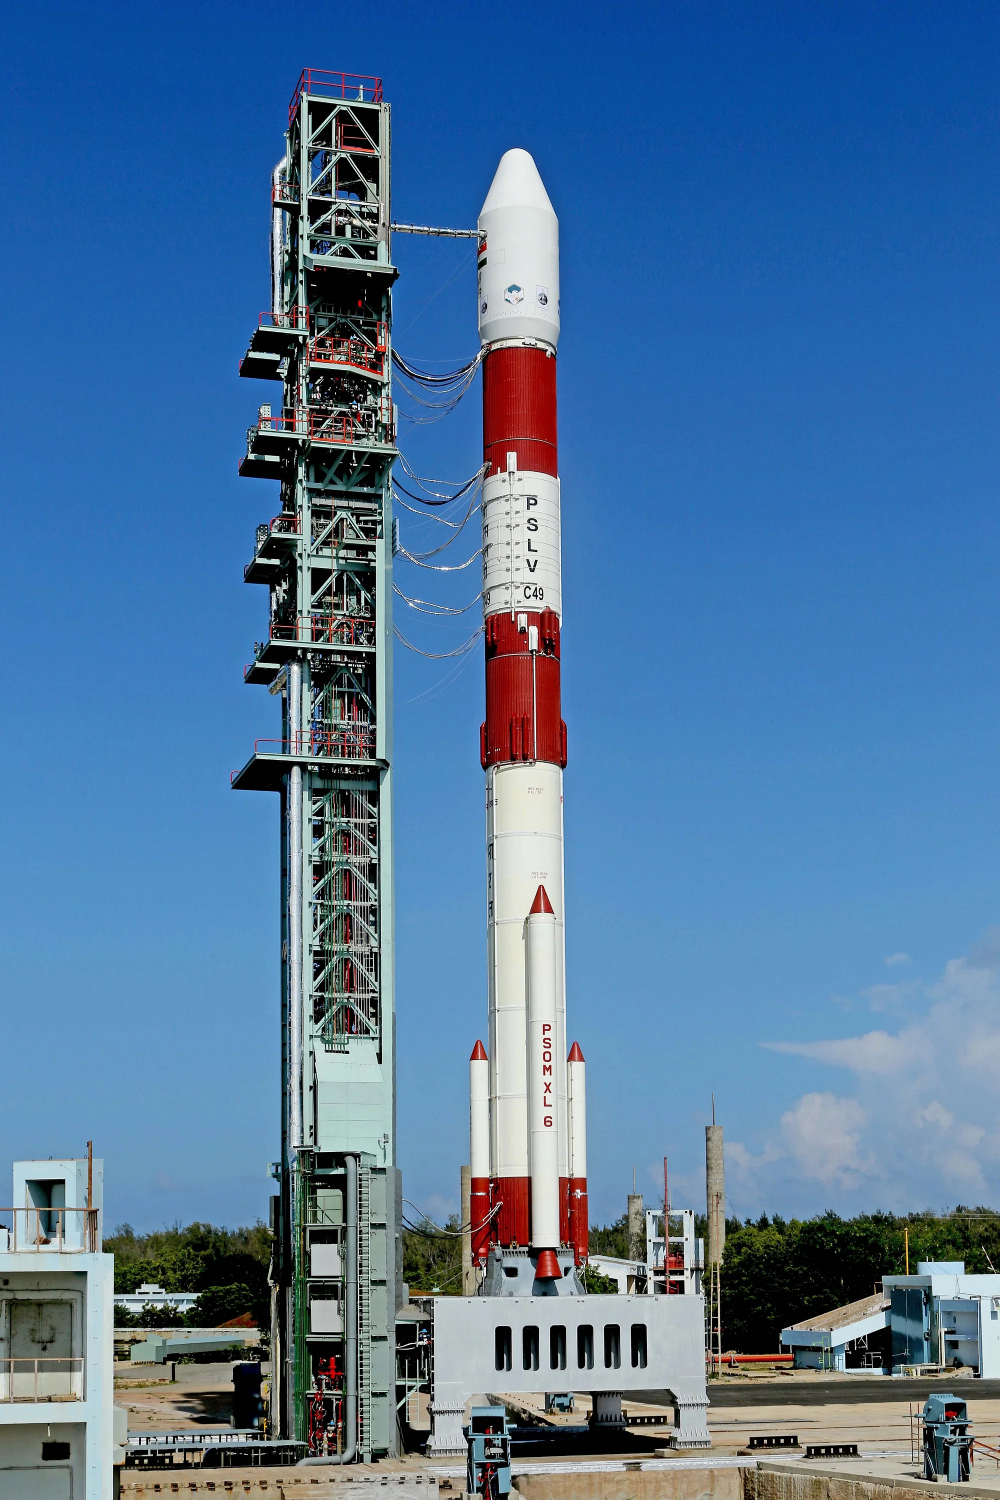 PSLV on its launchpad.